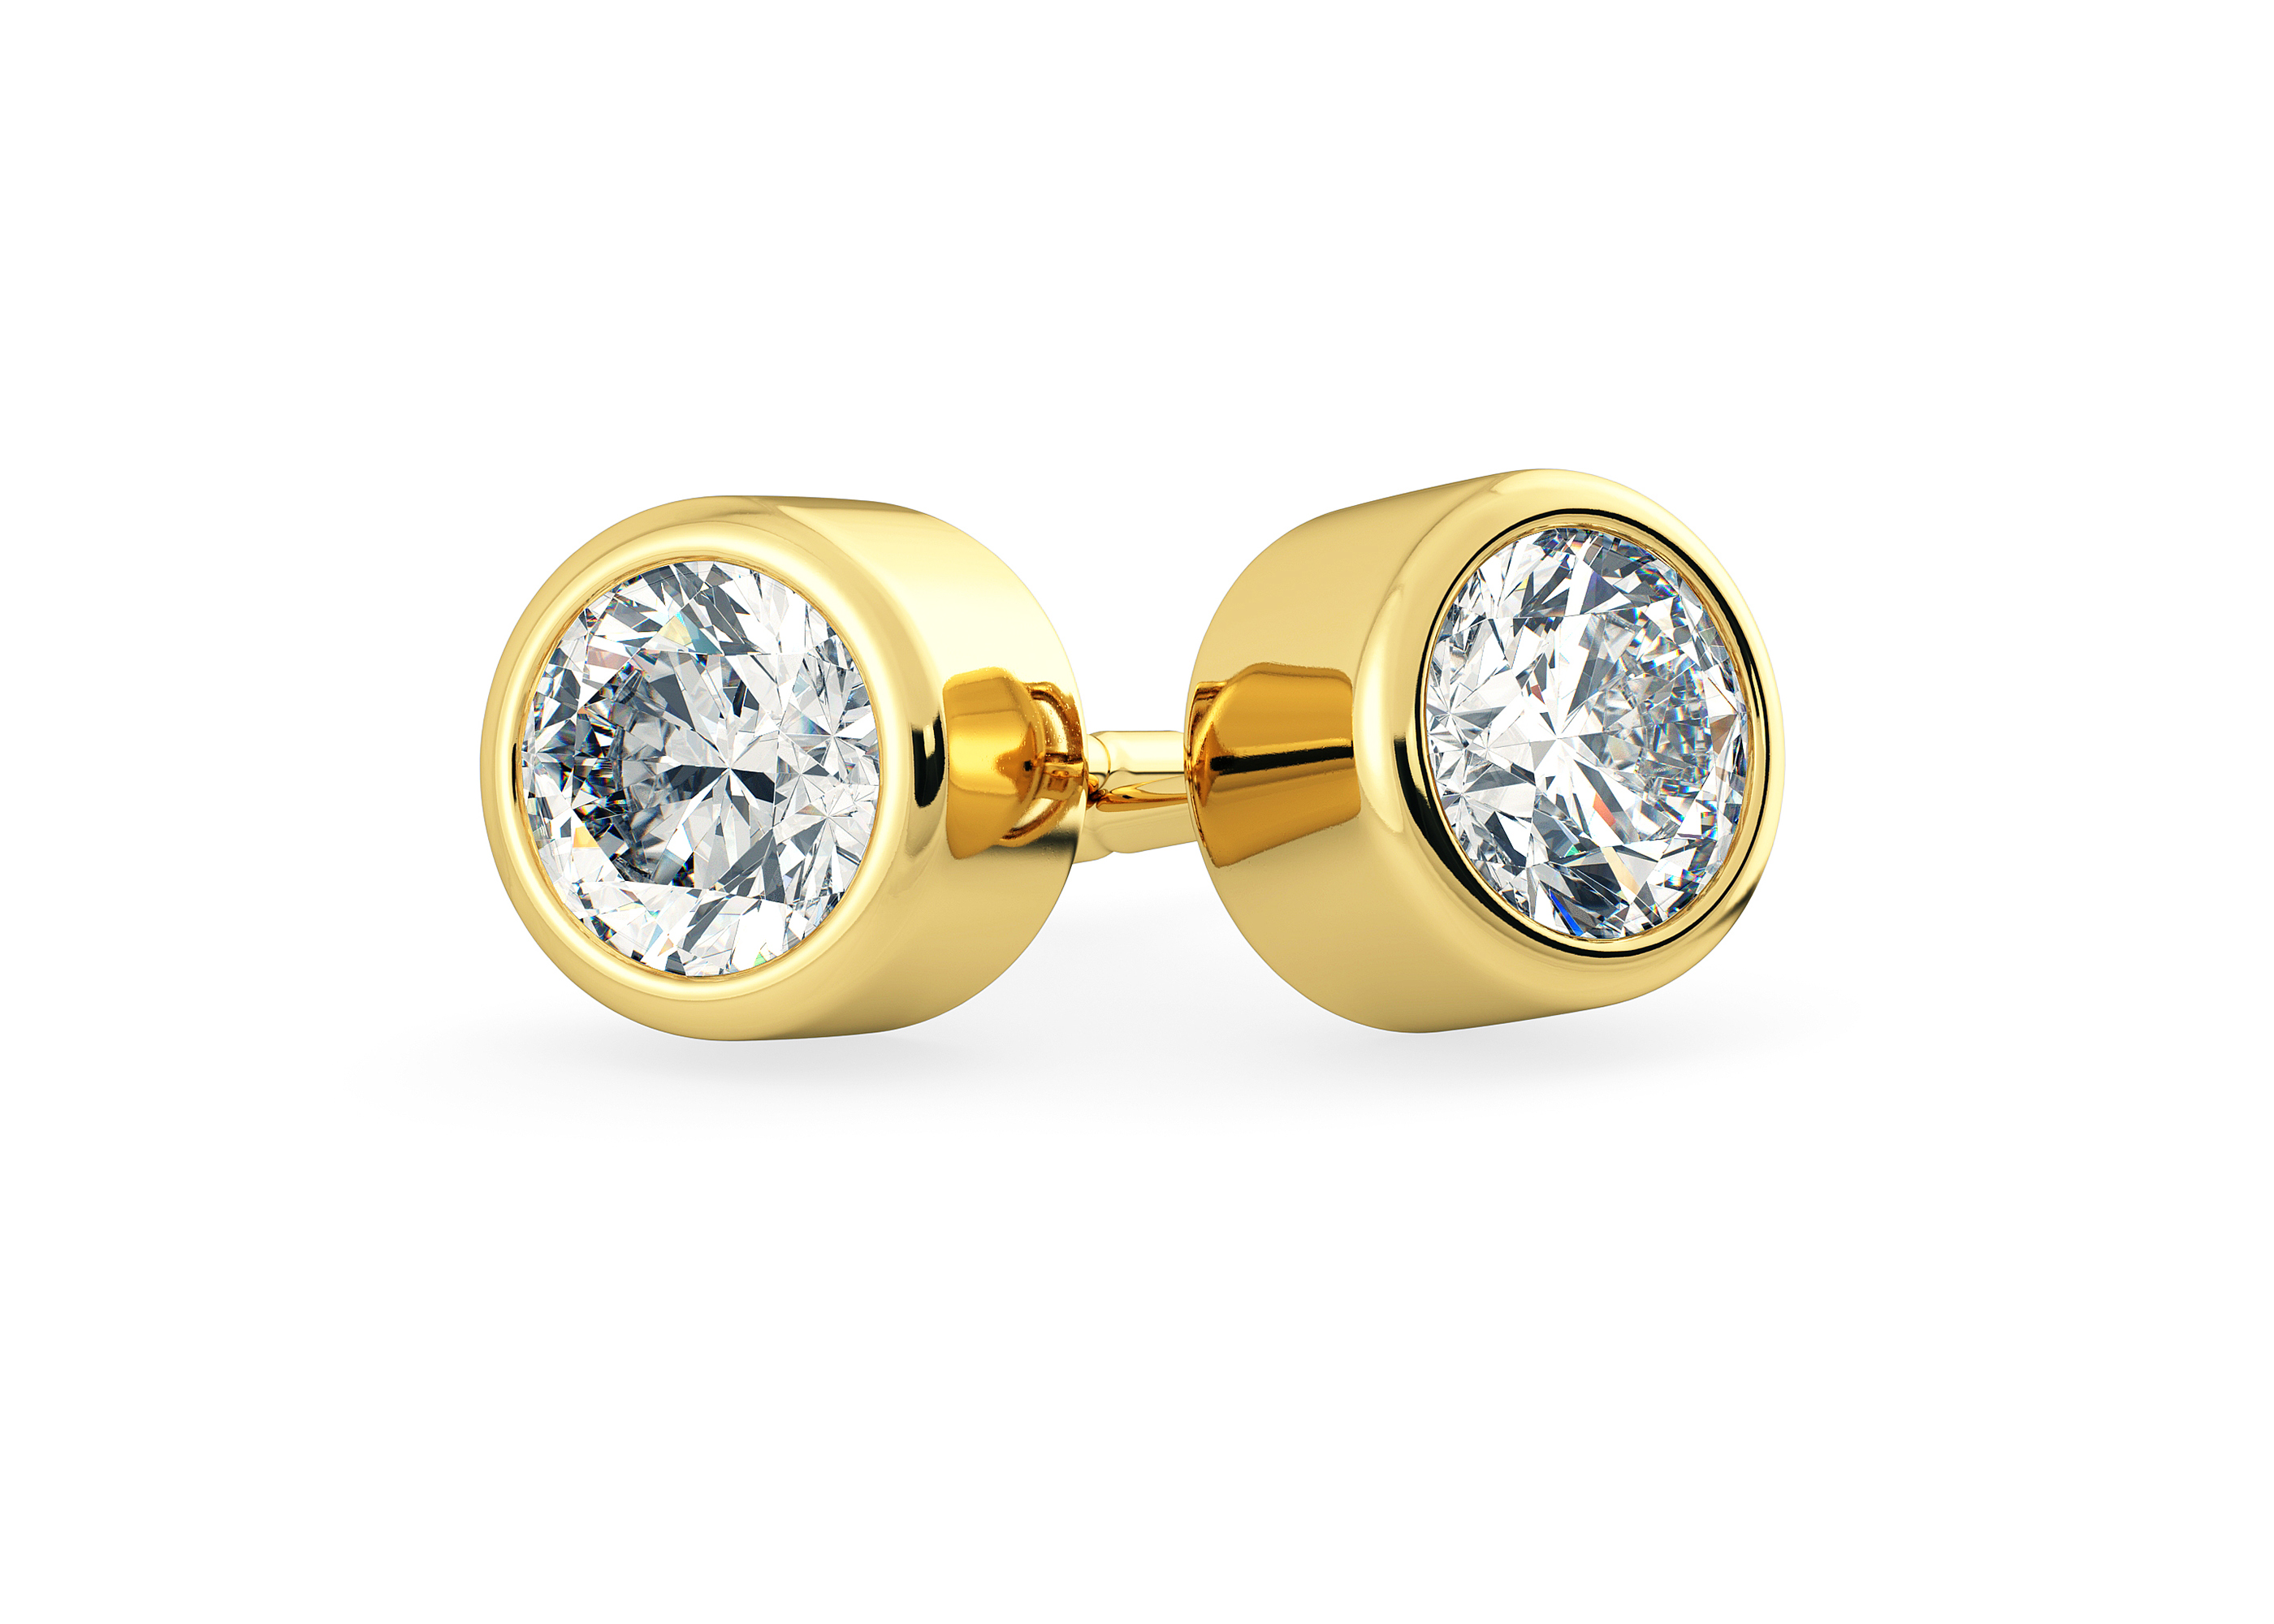 Carina Round Brilliant Diamond Stud Earrings in 18K Yellow Gold with Screw Backs